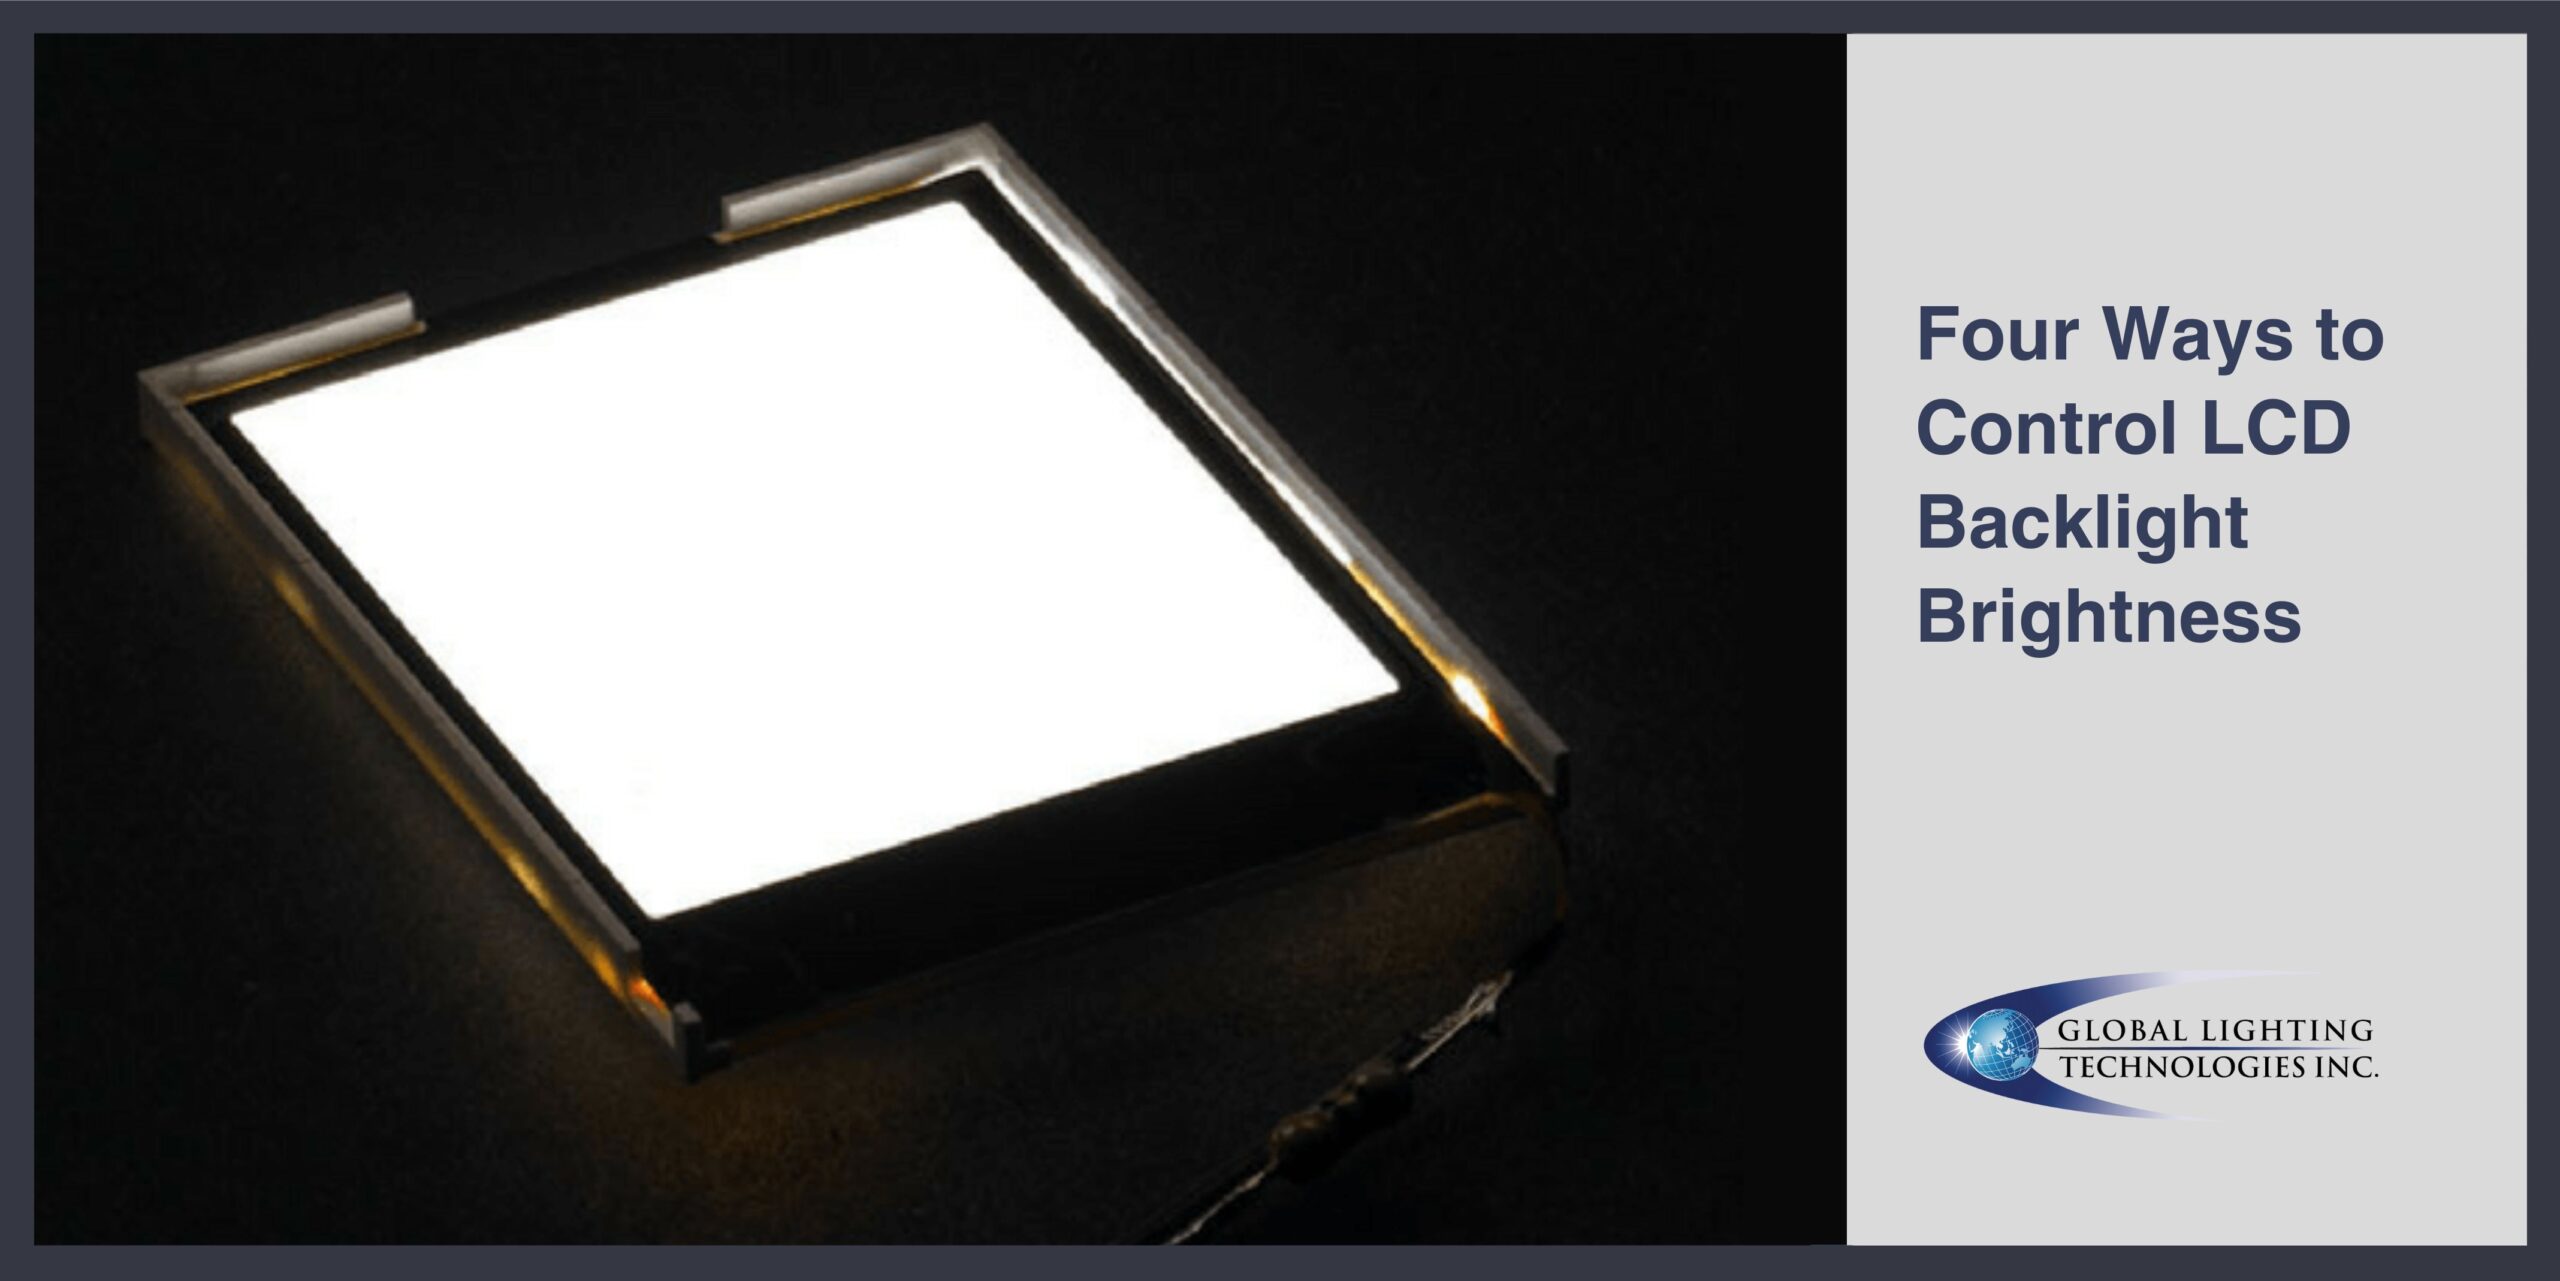 An article header image to show how to control LCD backlight brightness.